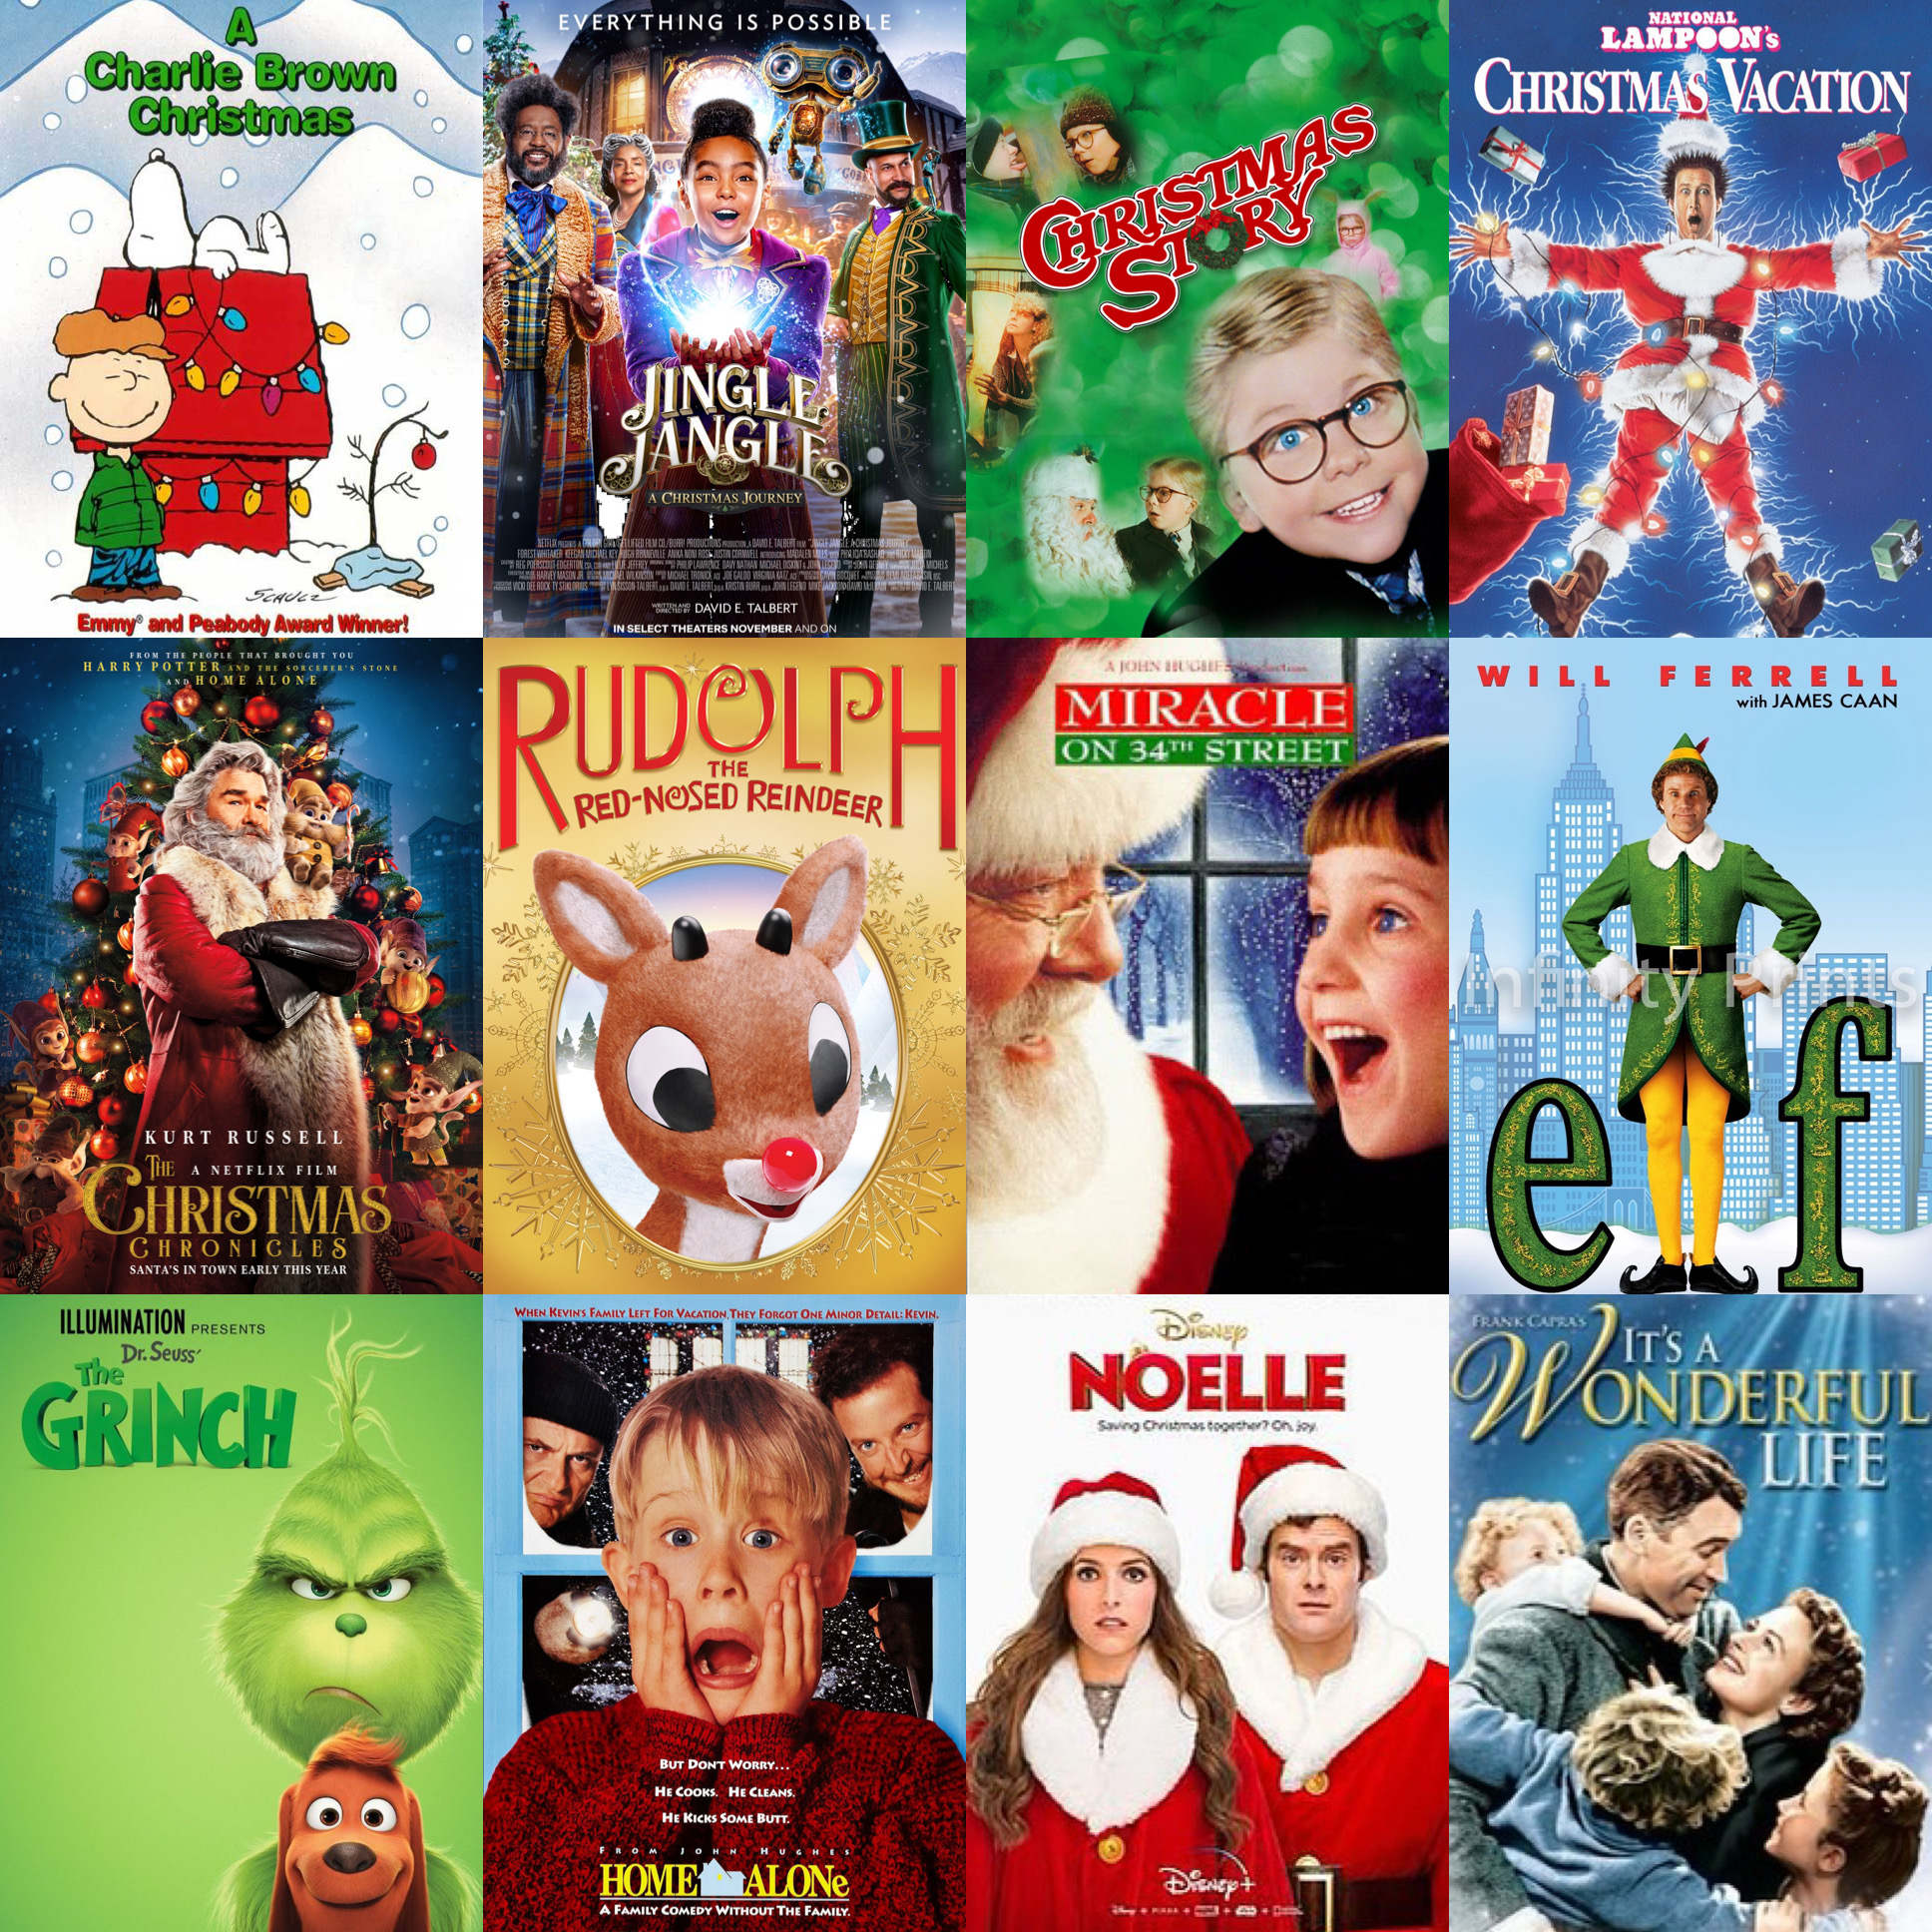 The Best Christmas Movies to Watch as a Family